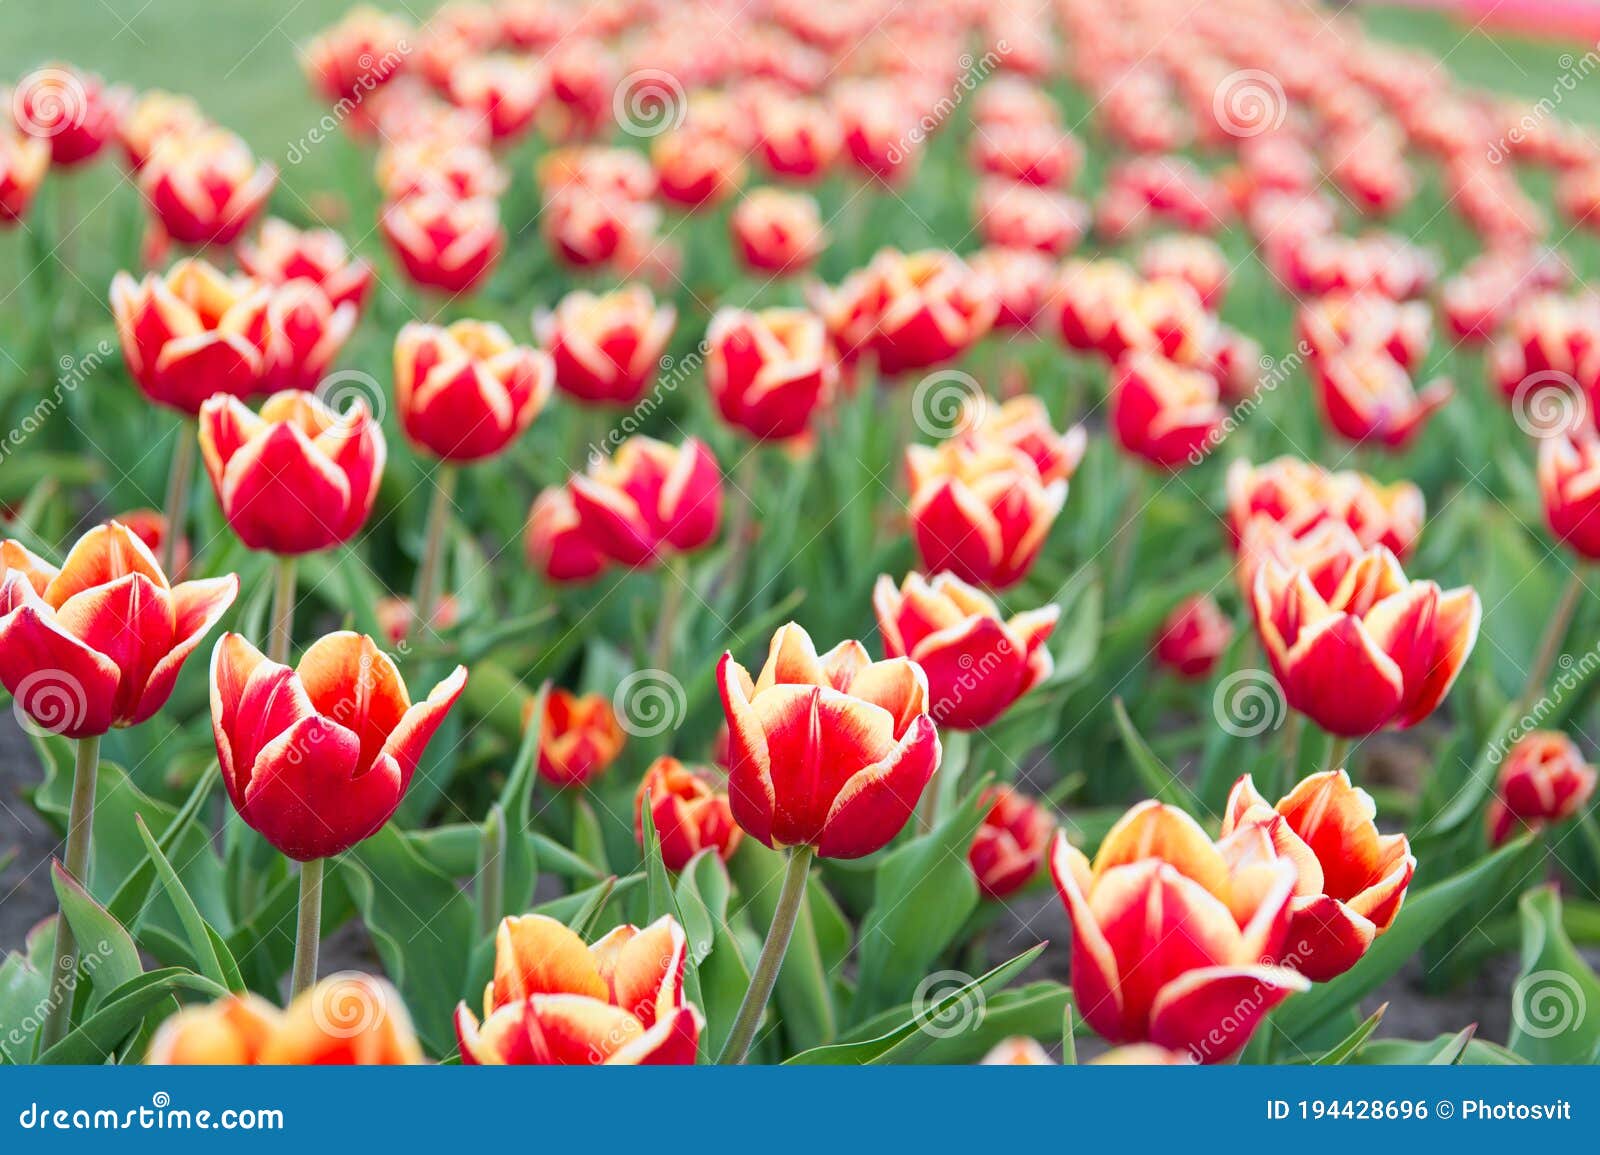 Floral Business. Learn How To Plant and Sell Tulip Bulbs for Profit ...